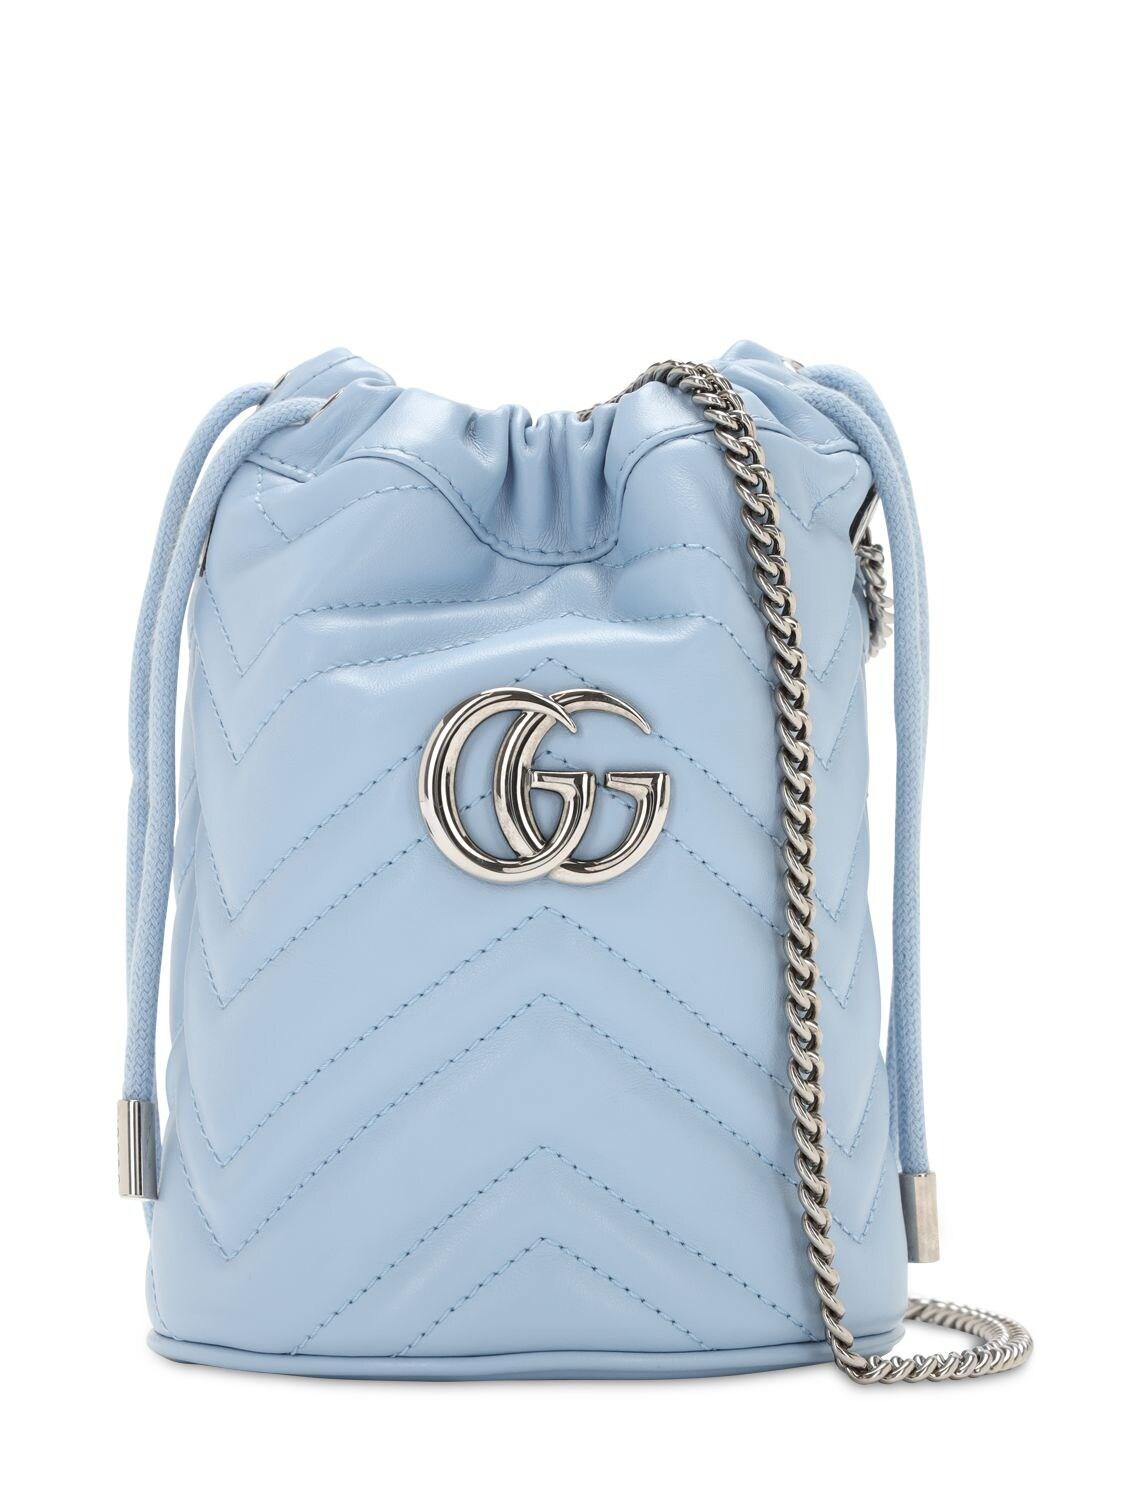 Gucci Mini Gg Marmont 2.0 Leather Bucket Bag in Light Blue (Blue) - Lyst